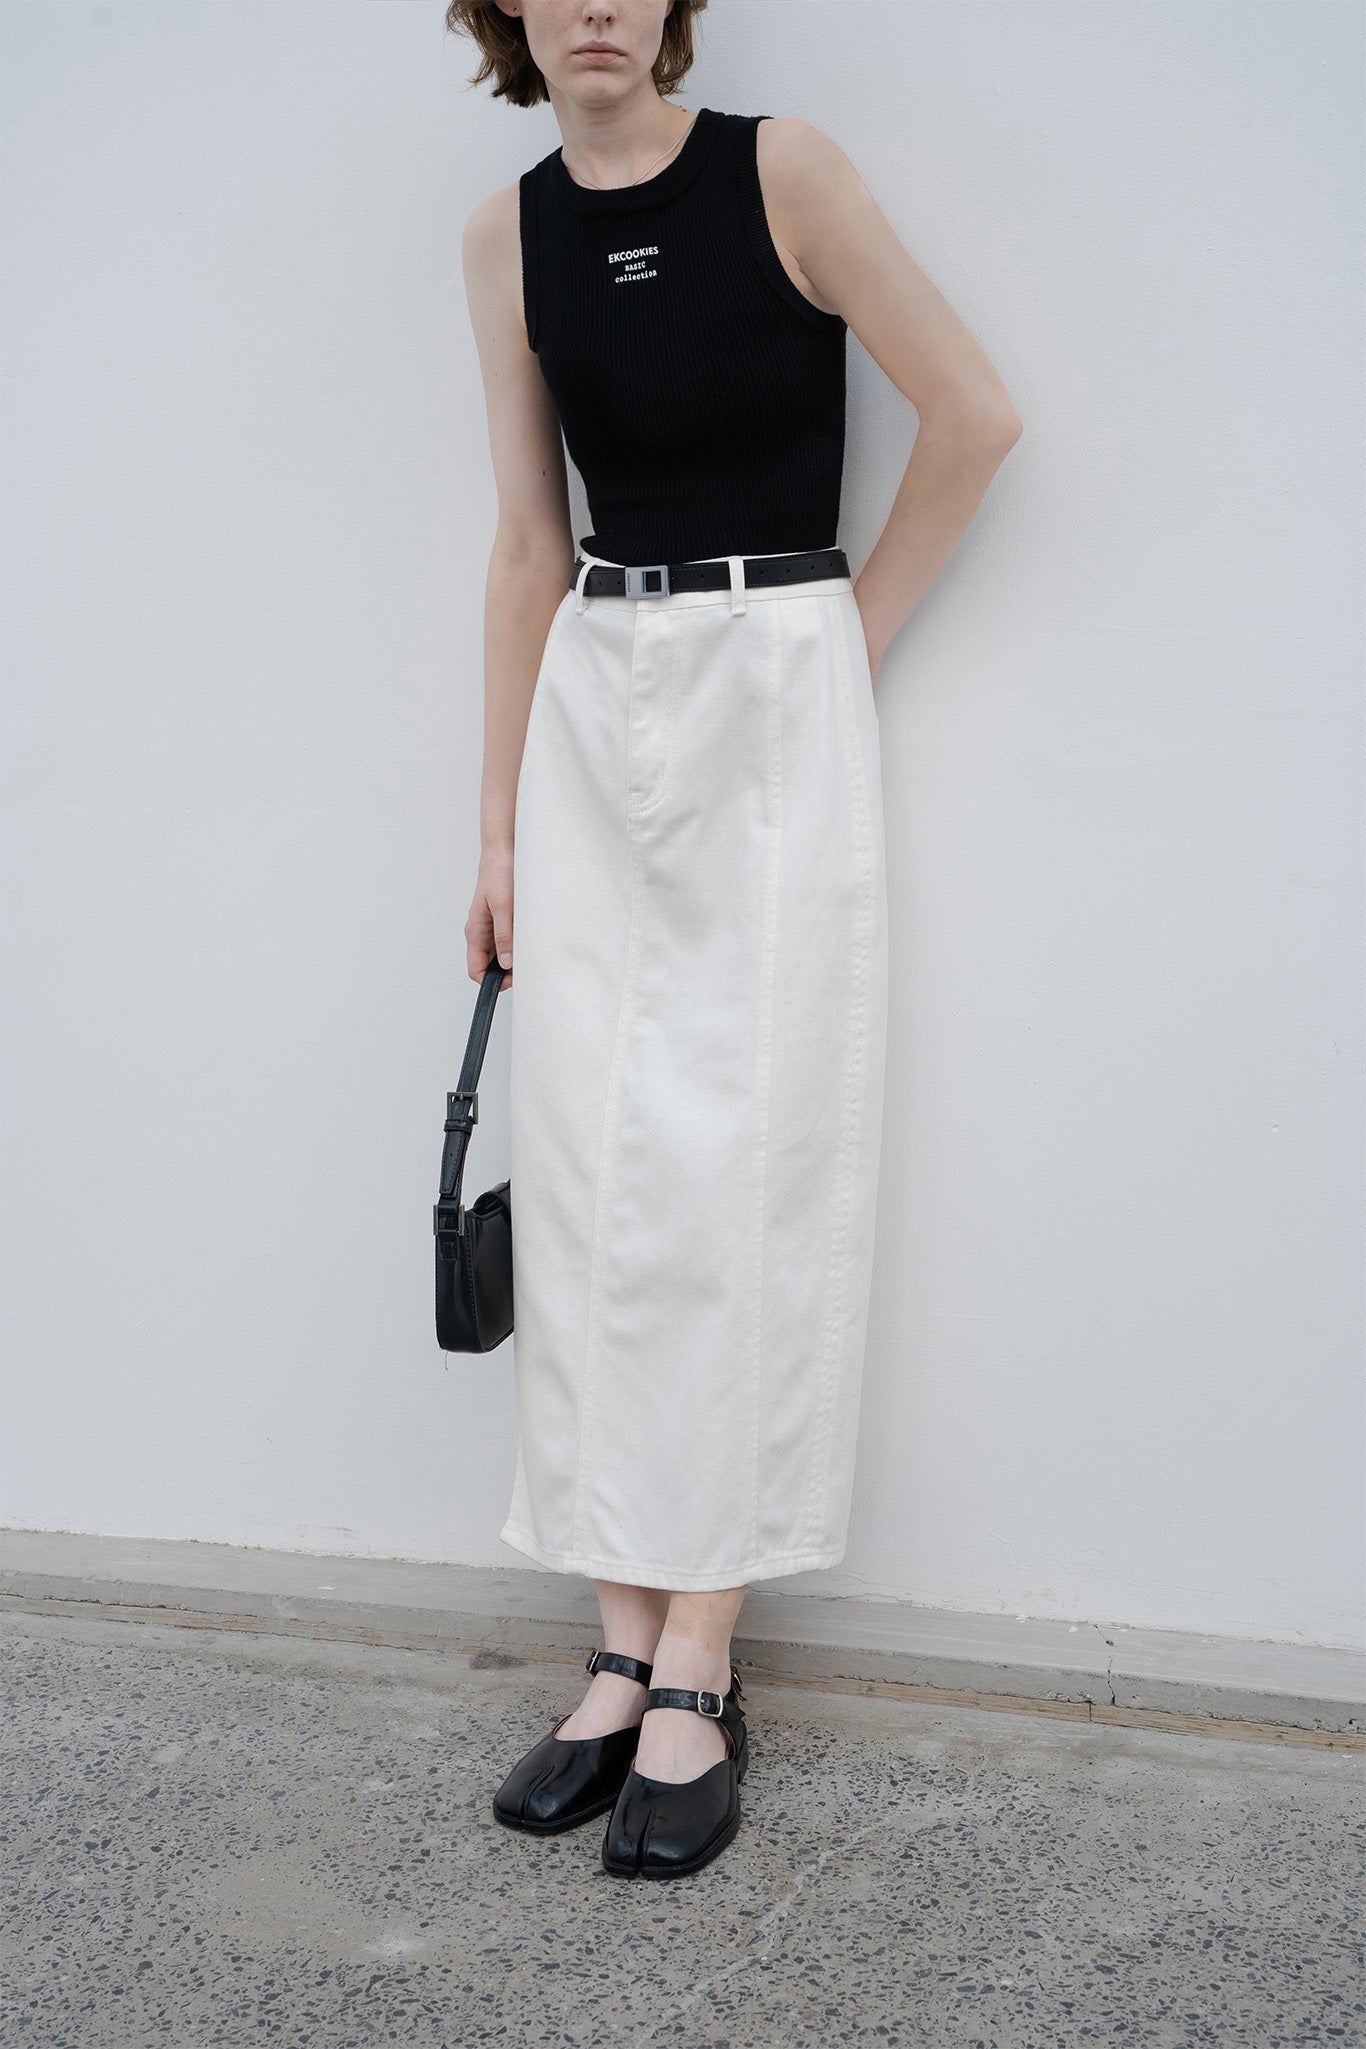 Straight cotton skirt with slit / maxi length 